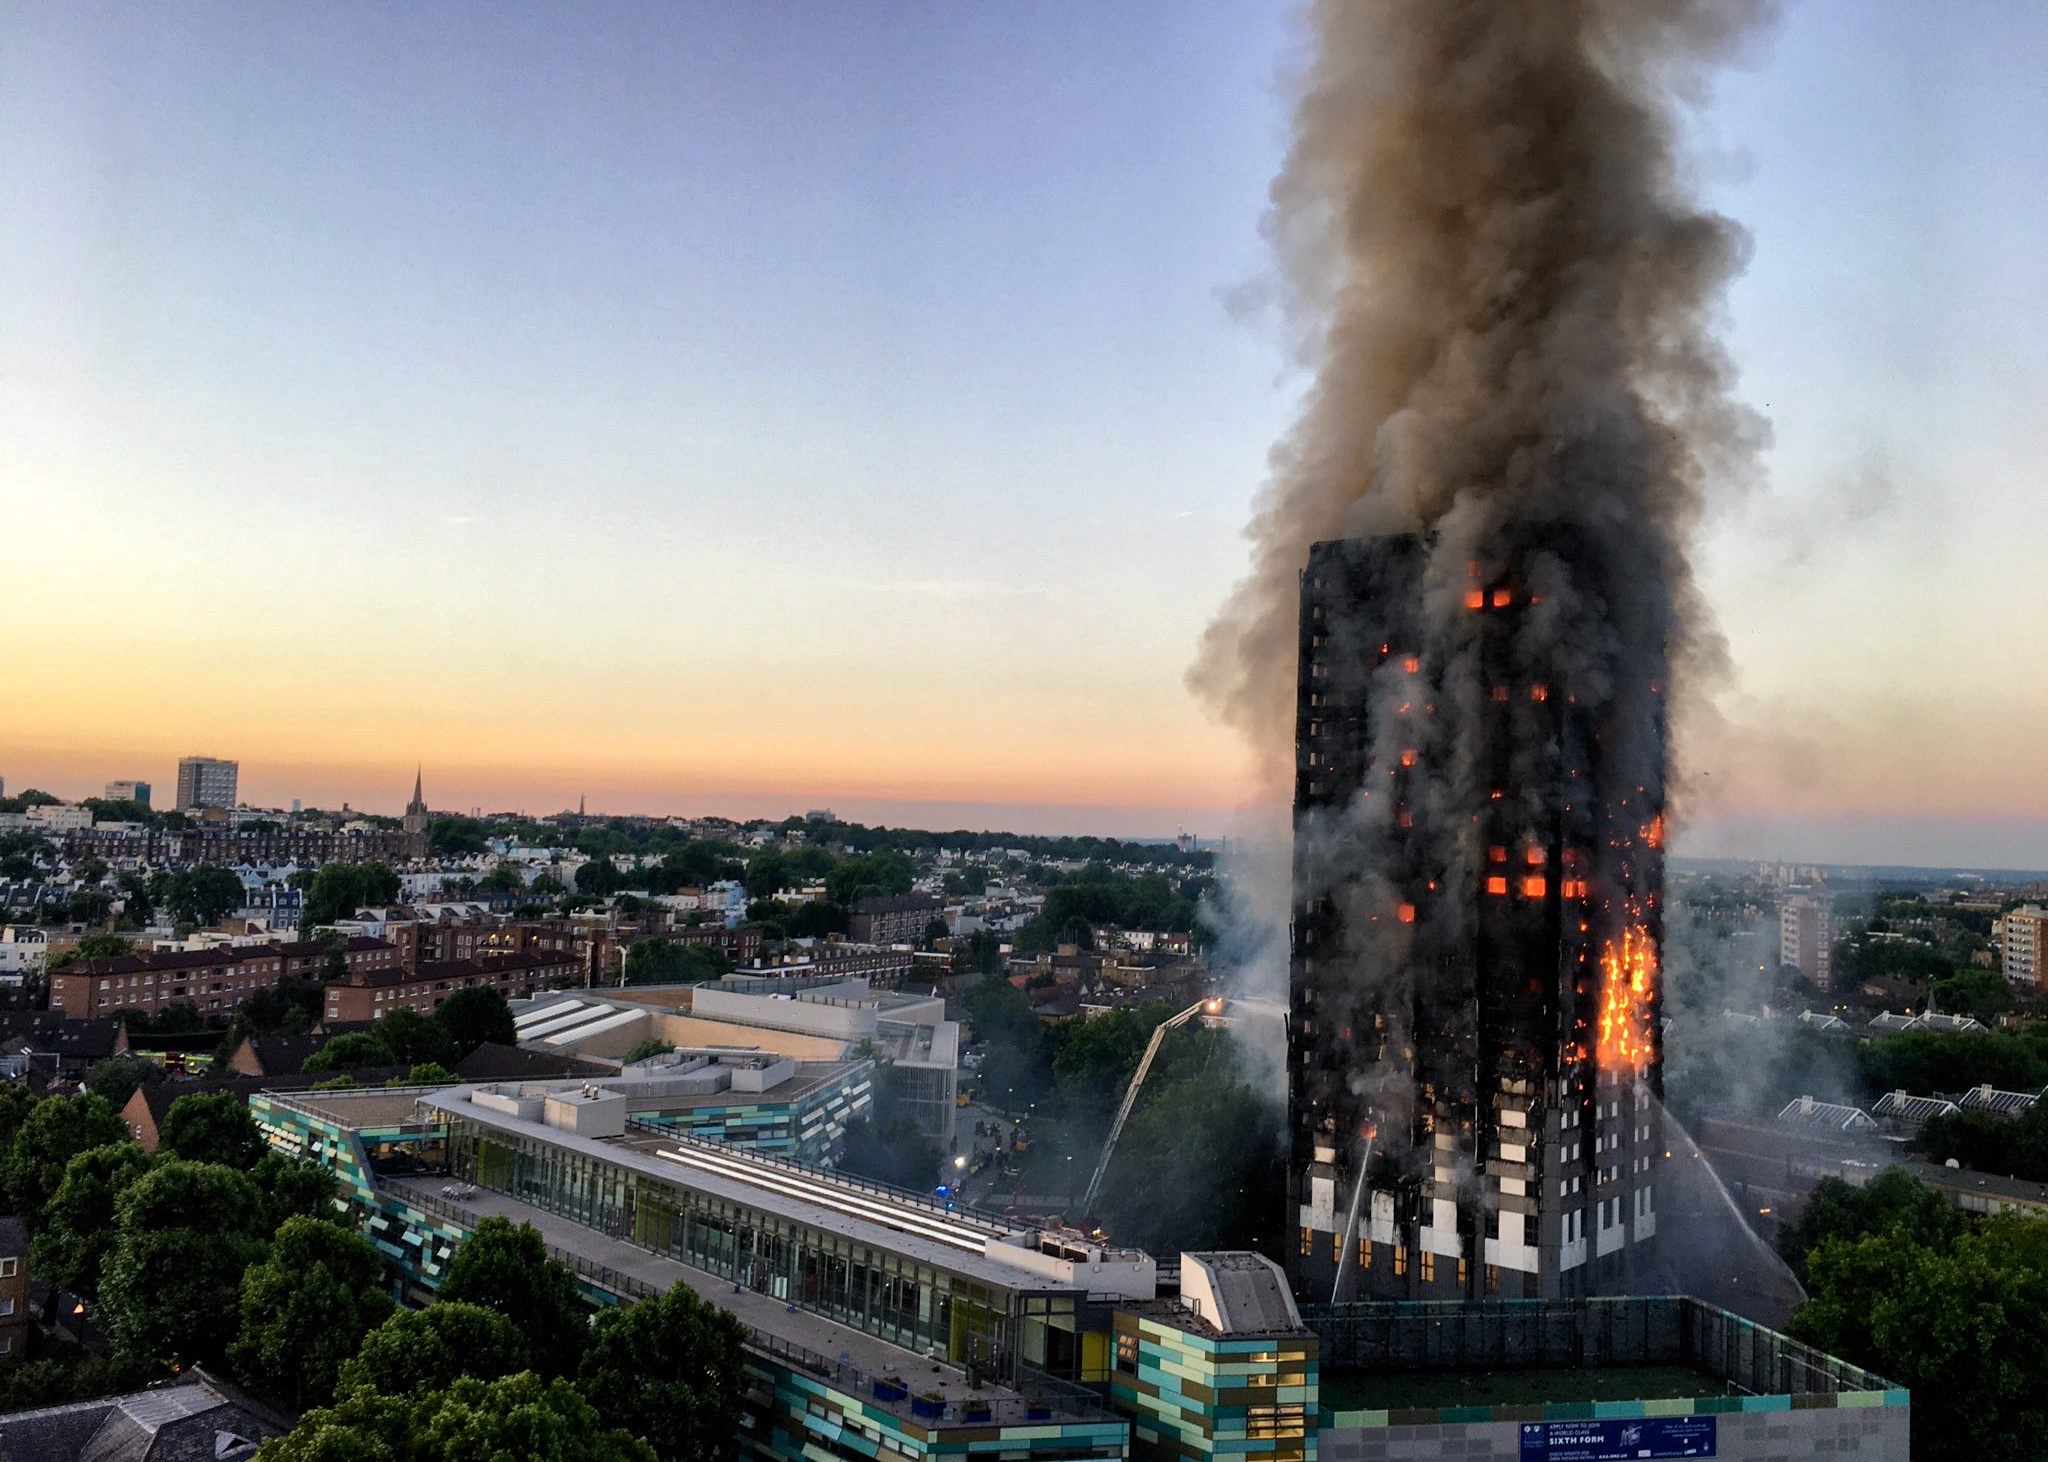 Jasmin Holley: The Grenfell Tower